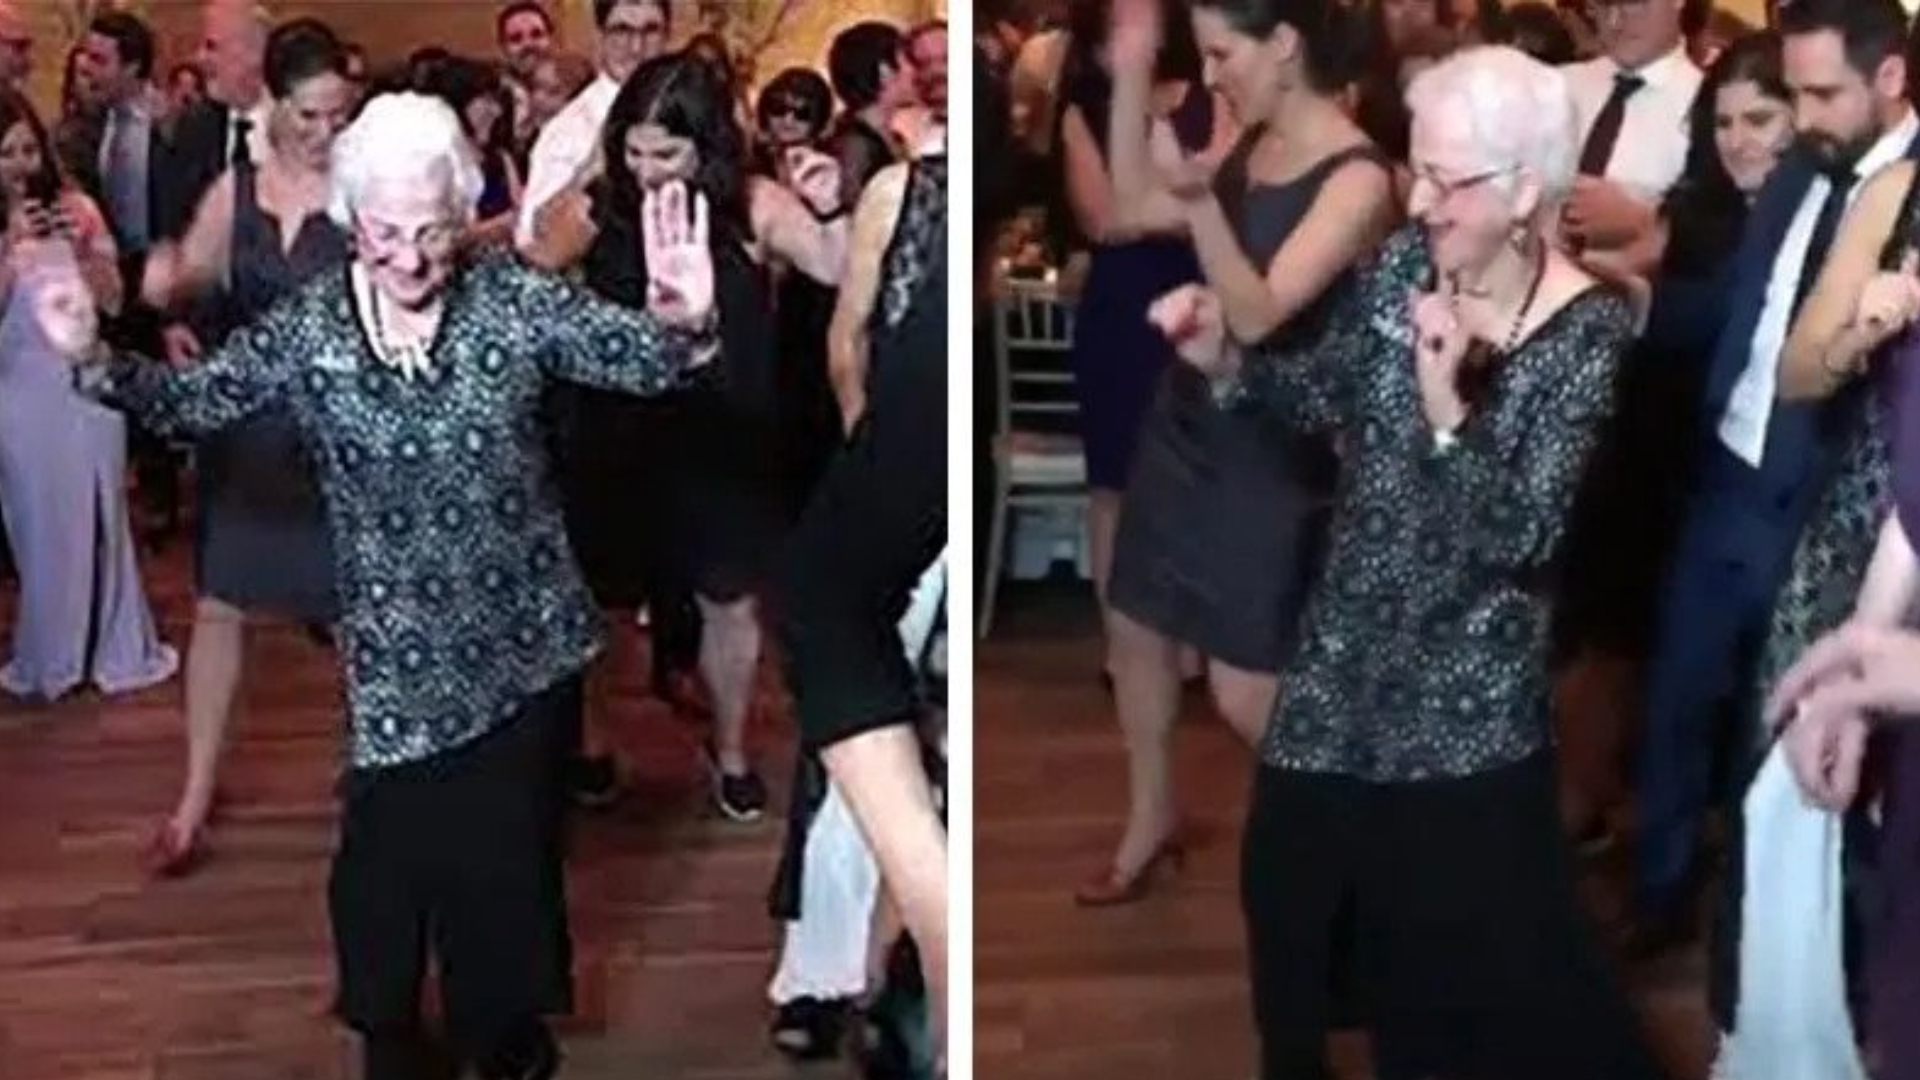 This 96 year old really knows how to party